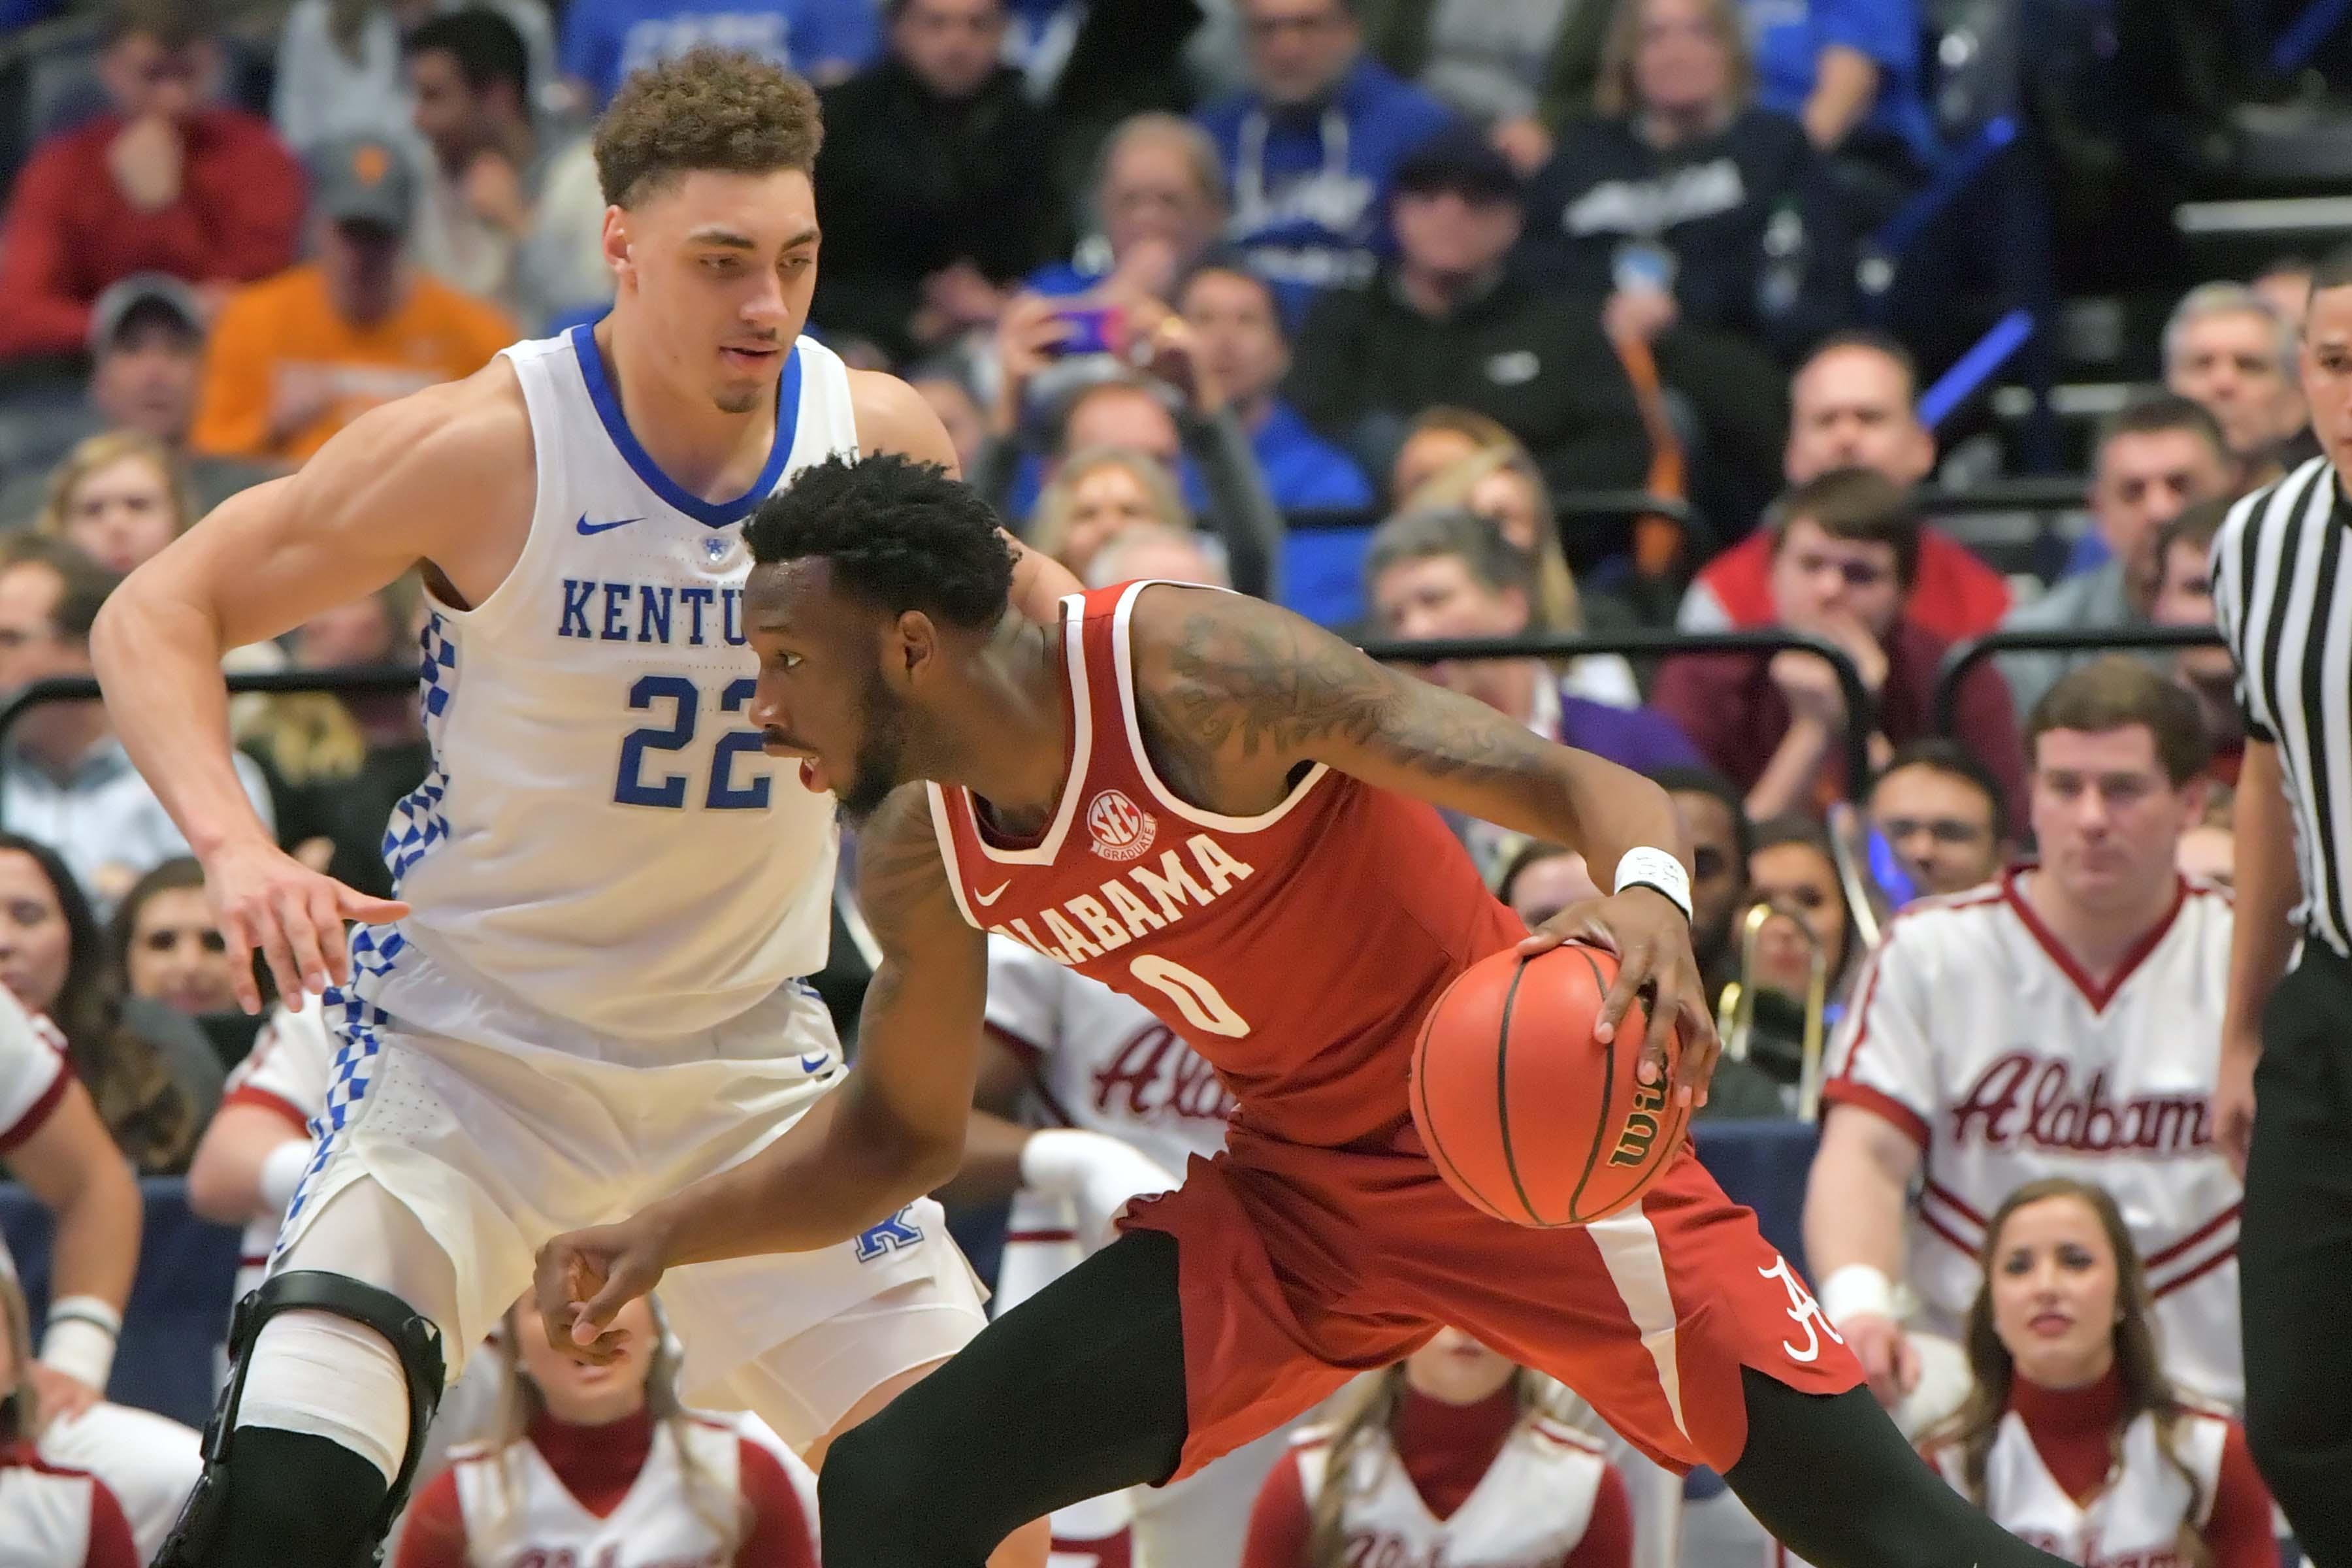 Mar 15, 2019; Nashville, TN, USA; Alabama Crimson Tide forward Donta Hall (0) controls the ball against Kentucky Wildcats forward Reid Travis (22) during the second half of game nine in the SEC conference tournament at Bridgestone Arena. Kentucky won 73-55. Mandatory Credit: Jim Brown-USA TODAY Sports / Jim Brown/USA TODAY Sports